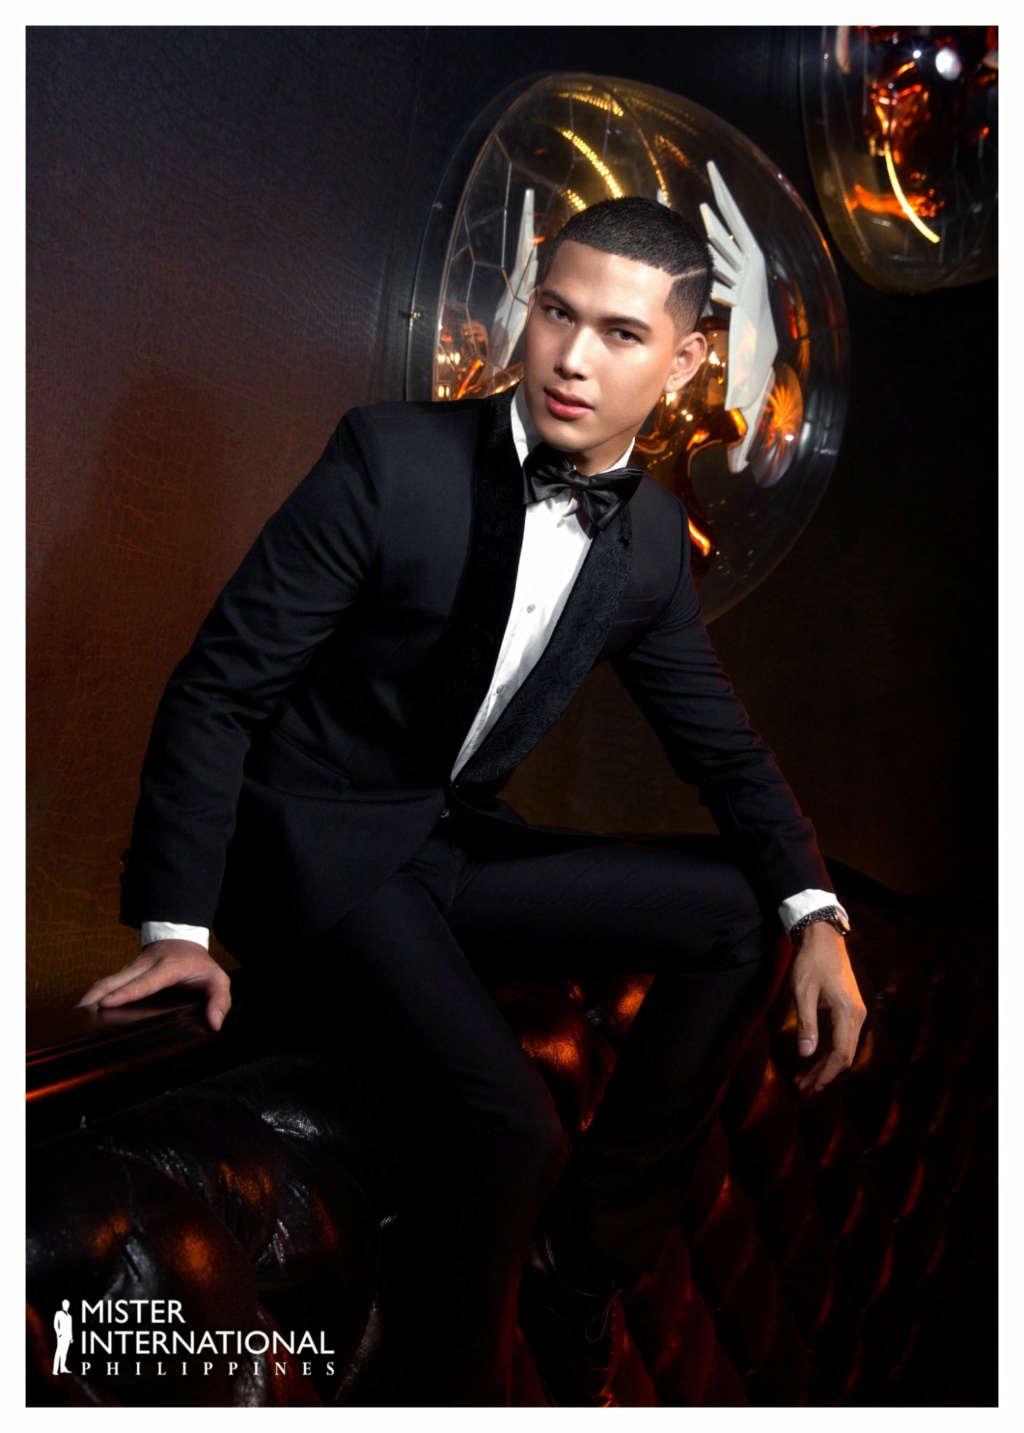 Mister International Philippines 2022  - Page 2 28809610